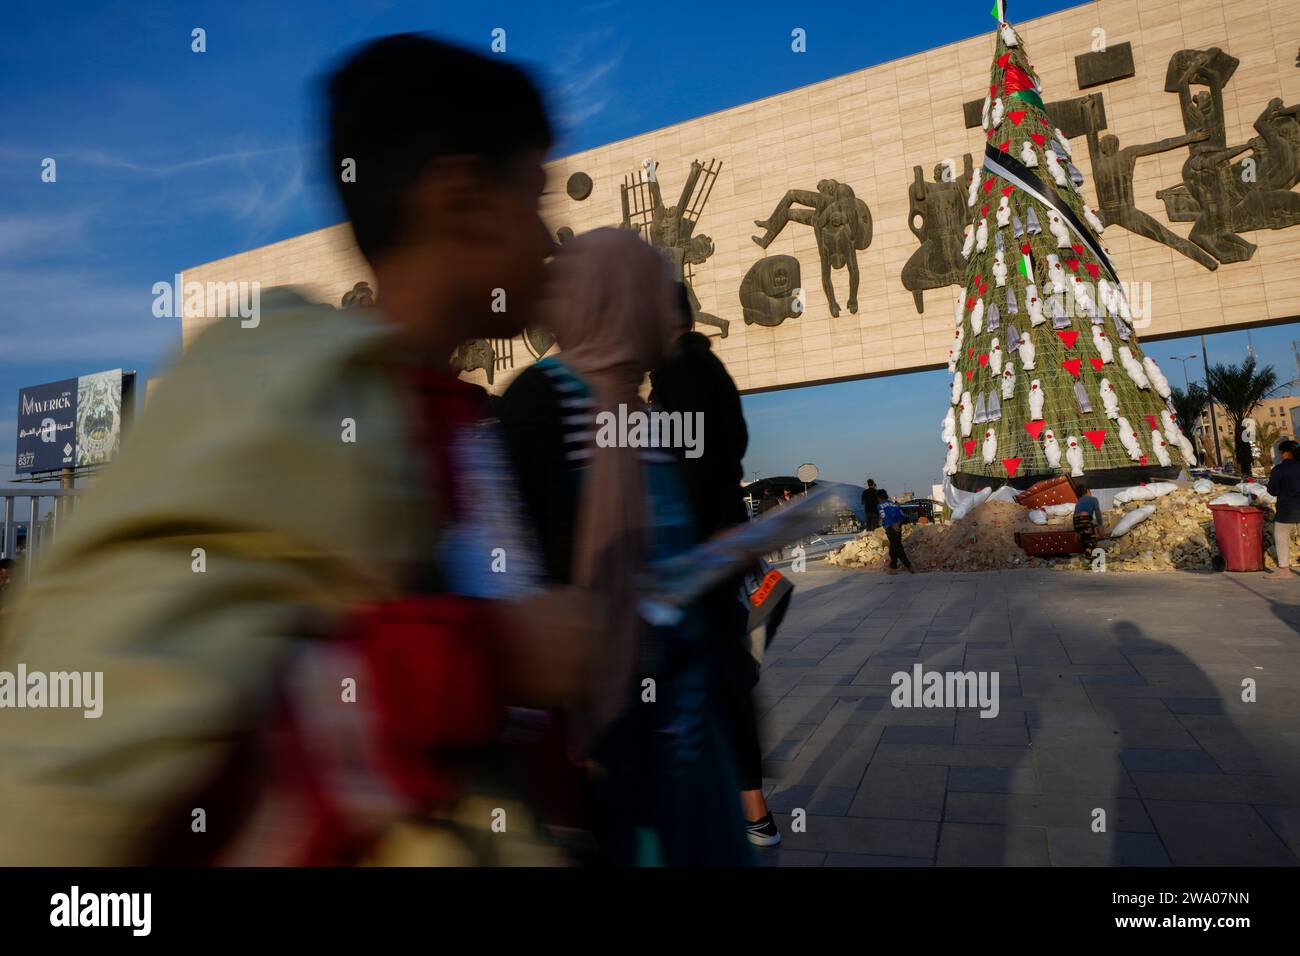 Iraqis stroll around a Christmas tree decorated with items resembling children wrapped in shrouds in a display of solidarity with Palestinians in Gaza, at Tahrir Square in Baghdad, Iraq, Sunday, Dec. 31, 2023. (AP Photo/Hadi Mizban) Stock Photo